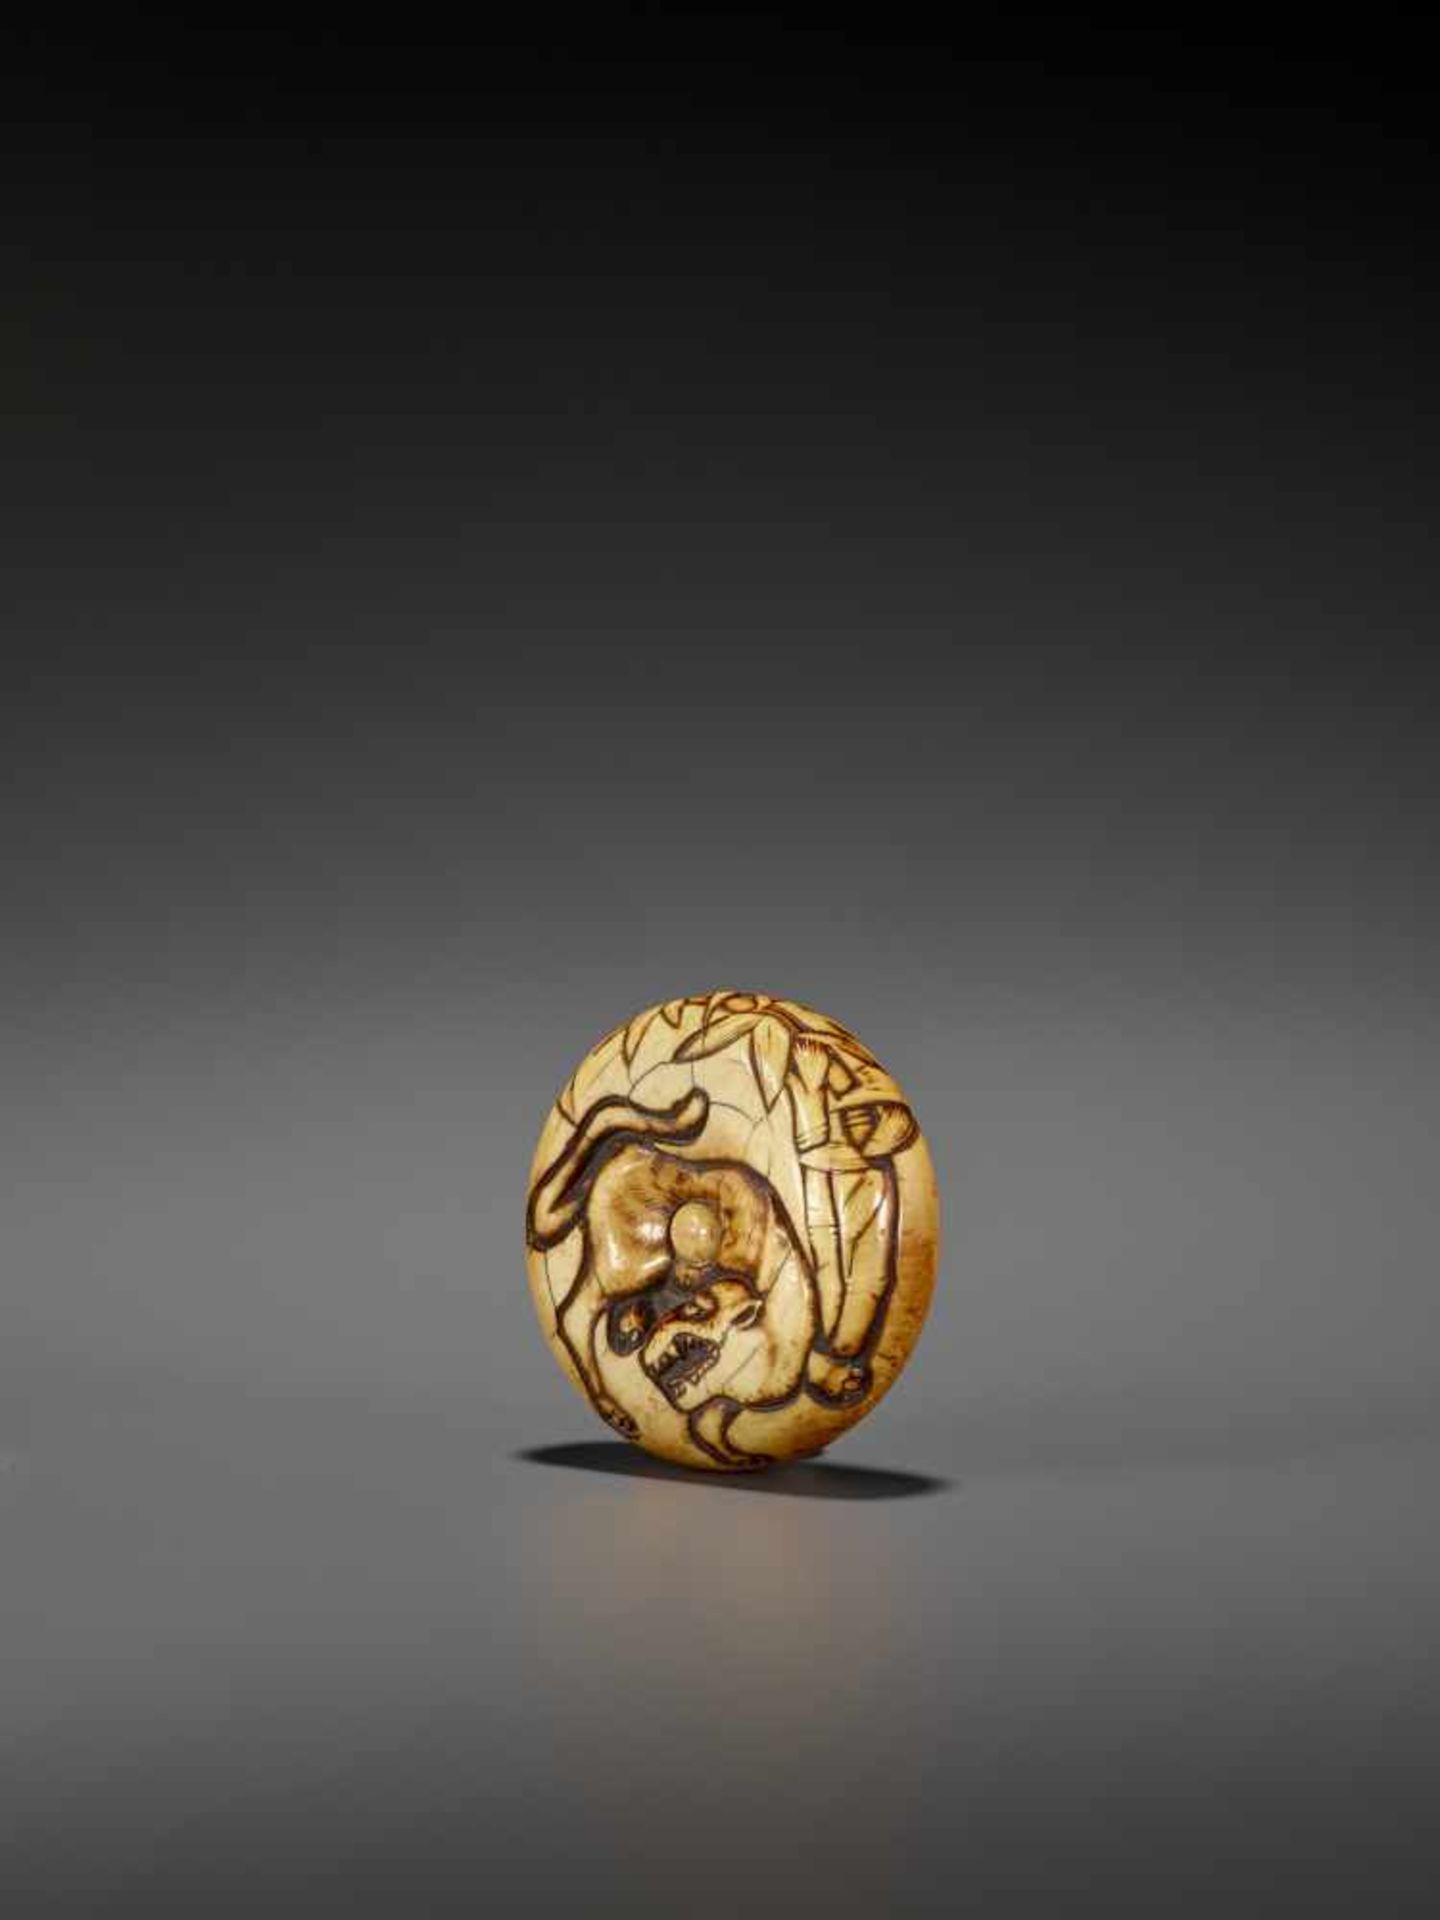 A LARGE EARLY IVORY MANJU WITH TIGER AND BAMBOO UnsignedJapan, 18th century, Edo period (1615-1868)A - Bild 2 aus 6